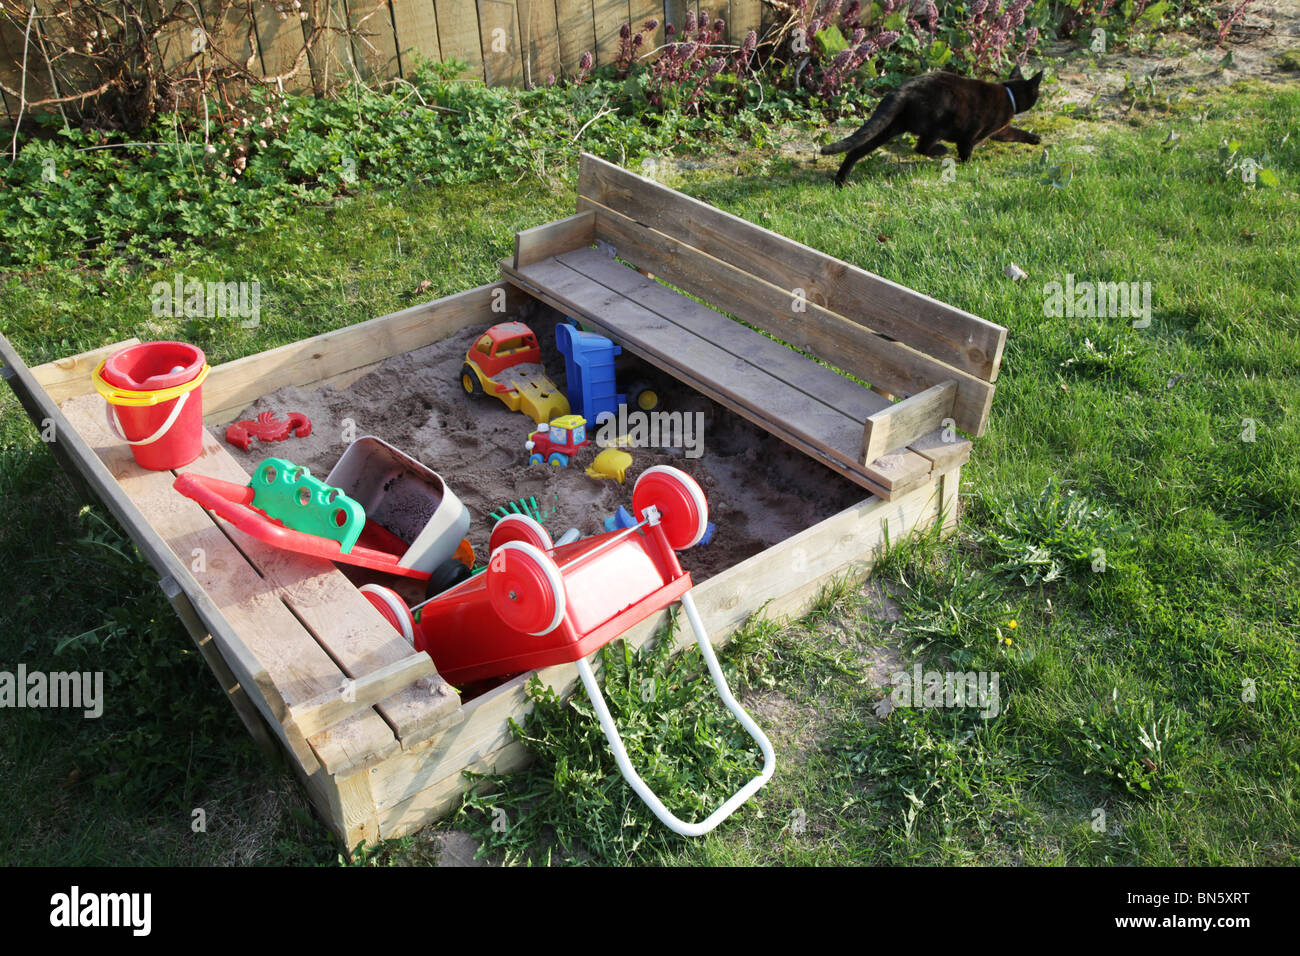 A black cat passes a sandpit in a garden filled with abandoned plastic toys Stock Photo